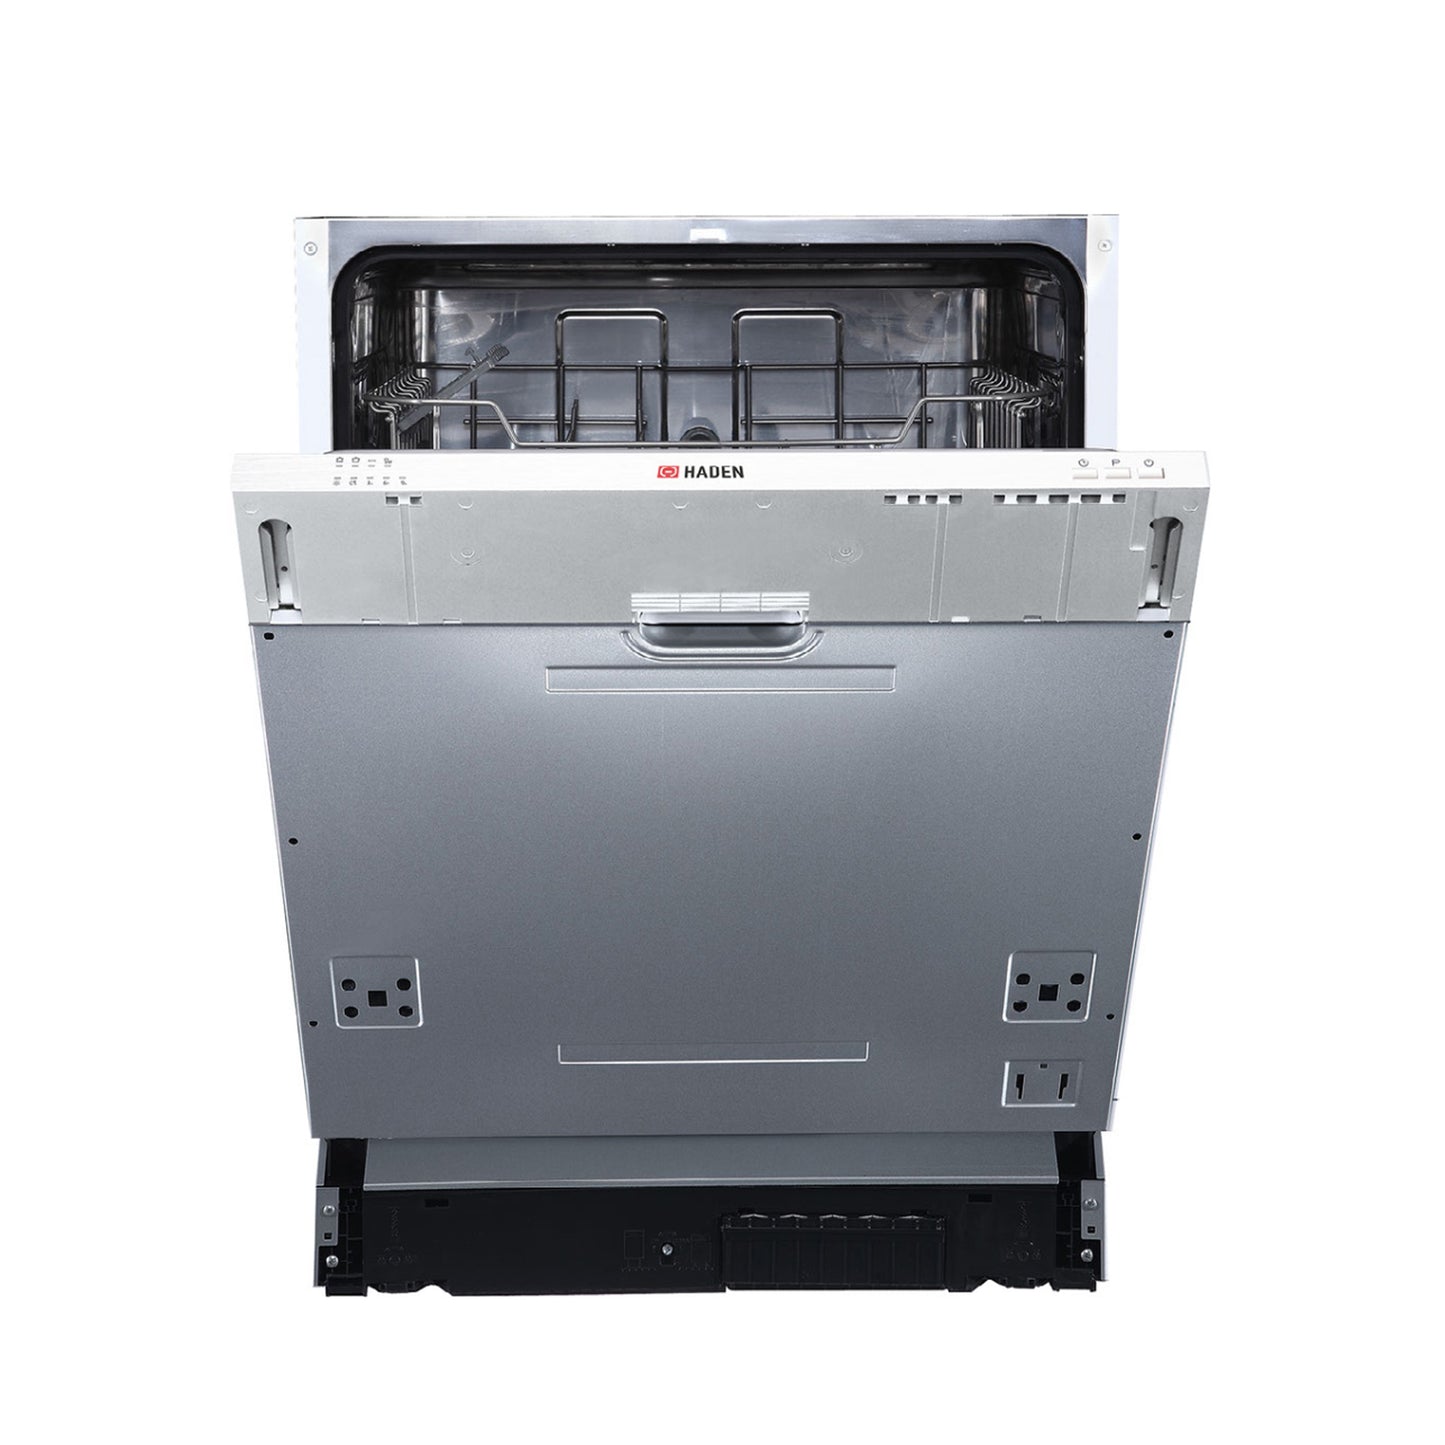 HDI6014 – 60CM INTEGRATED BUILT IN DISHWASHER